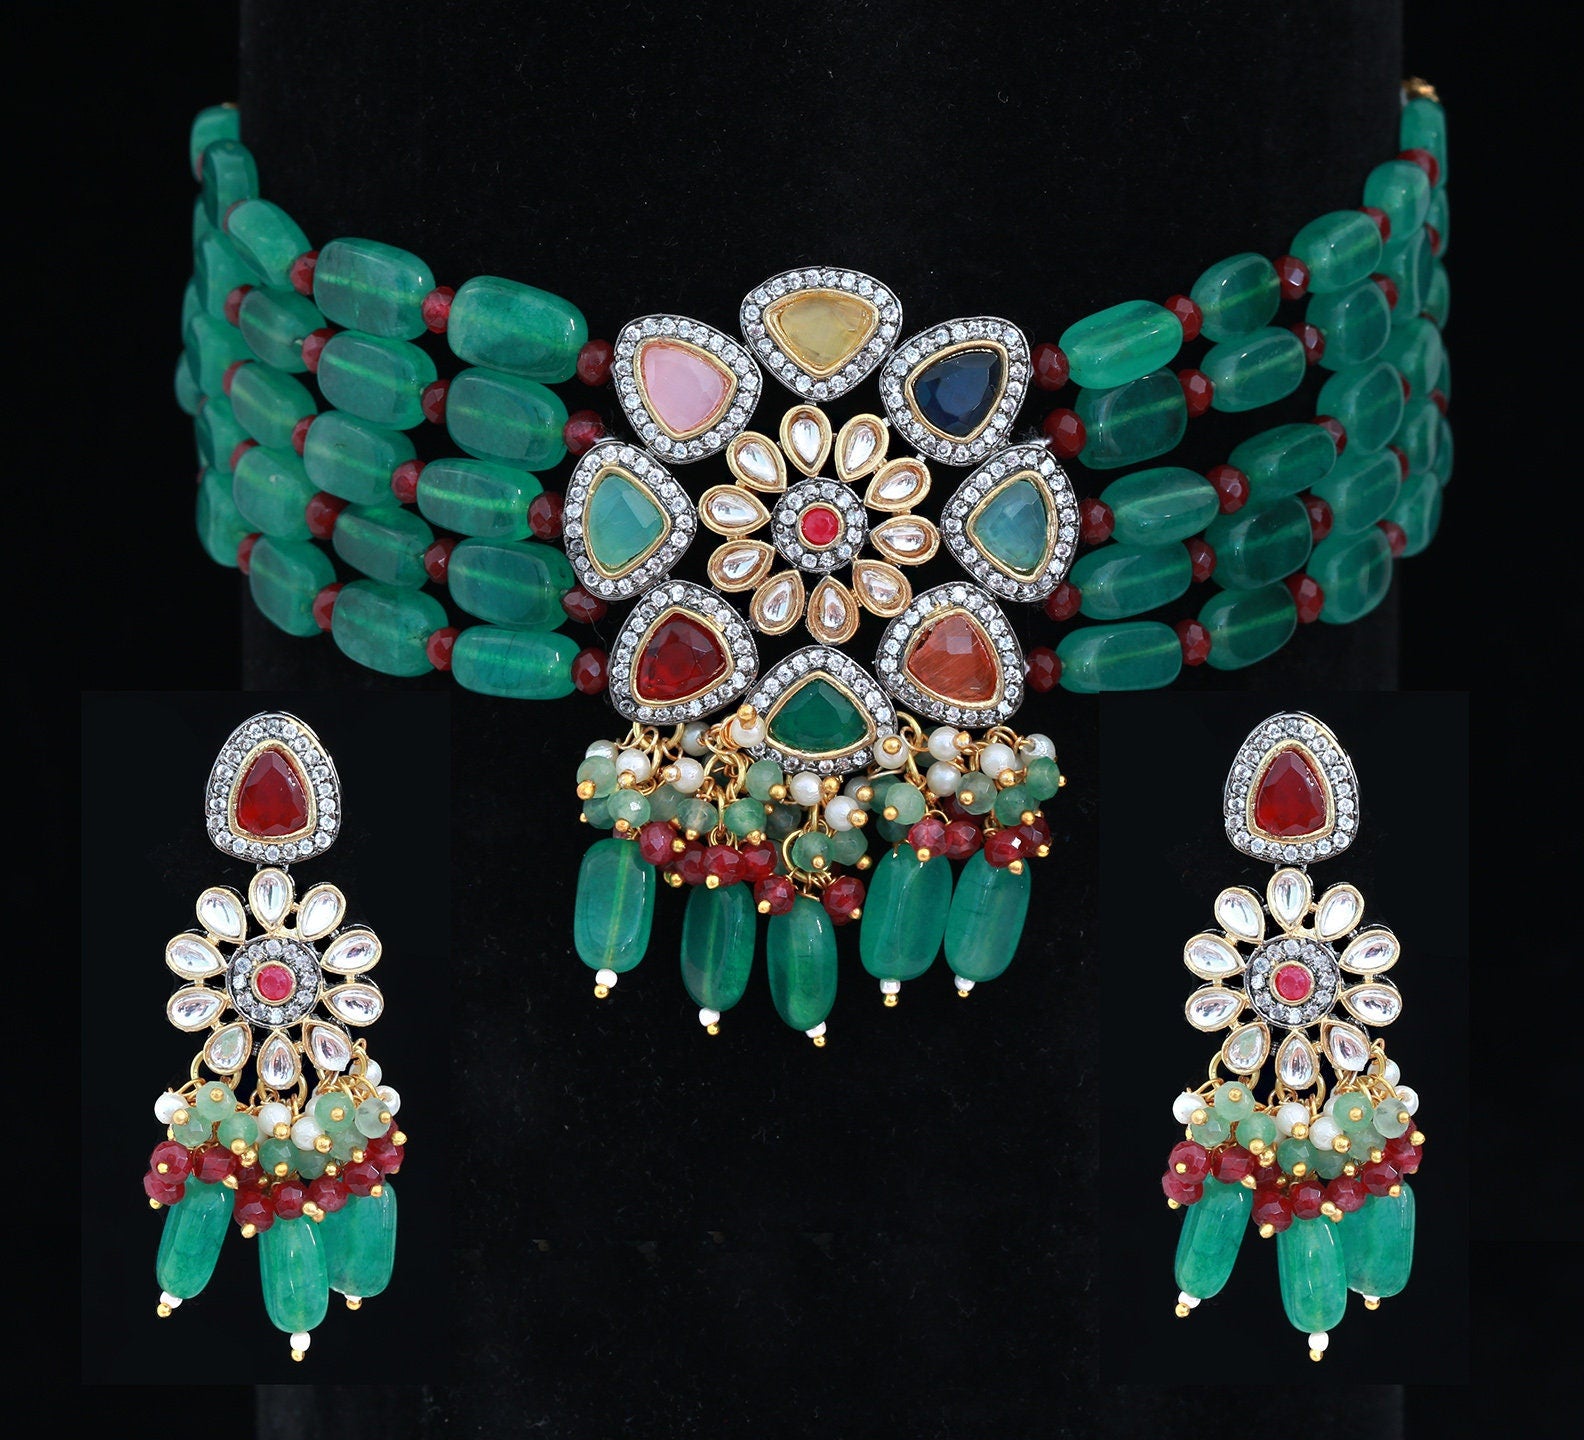 22K Gold Necklace with Navrathan Stones, Pearls, Cz & Emerald Beads -  235-GN3971 in 23.650 Grams